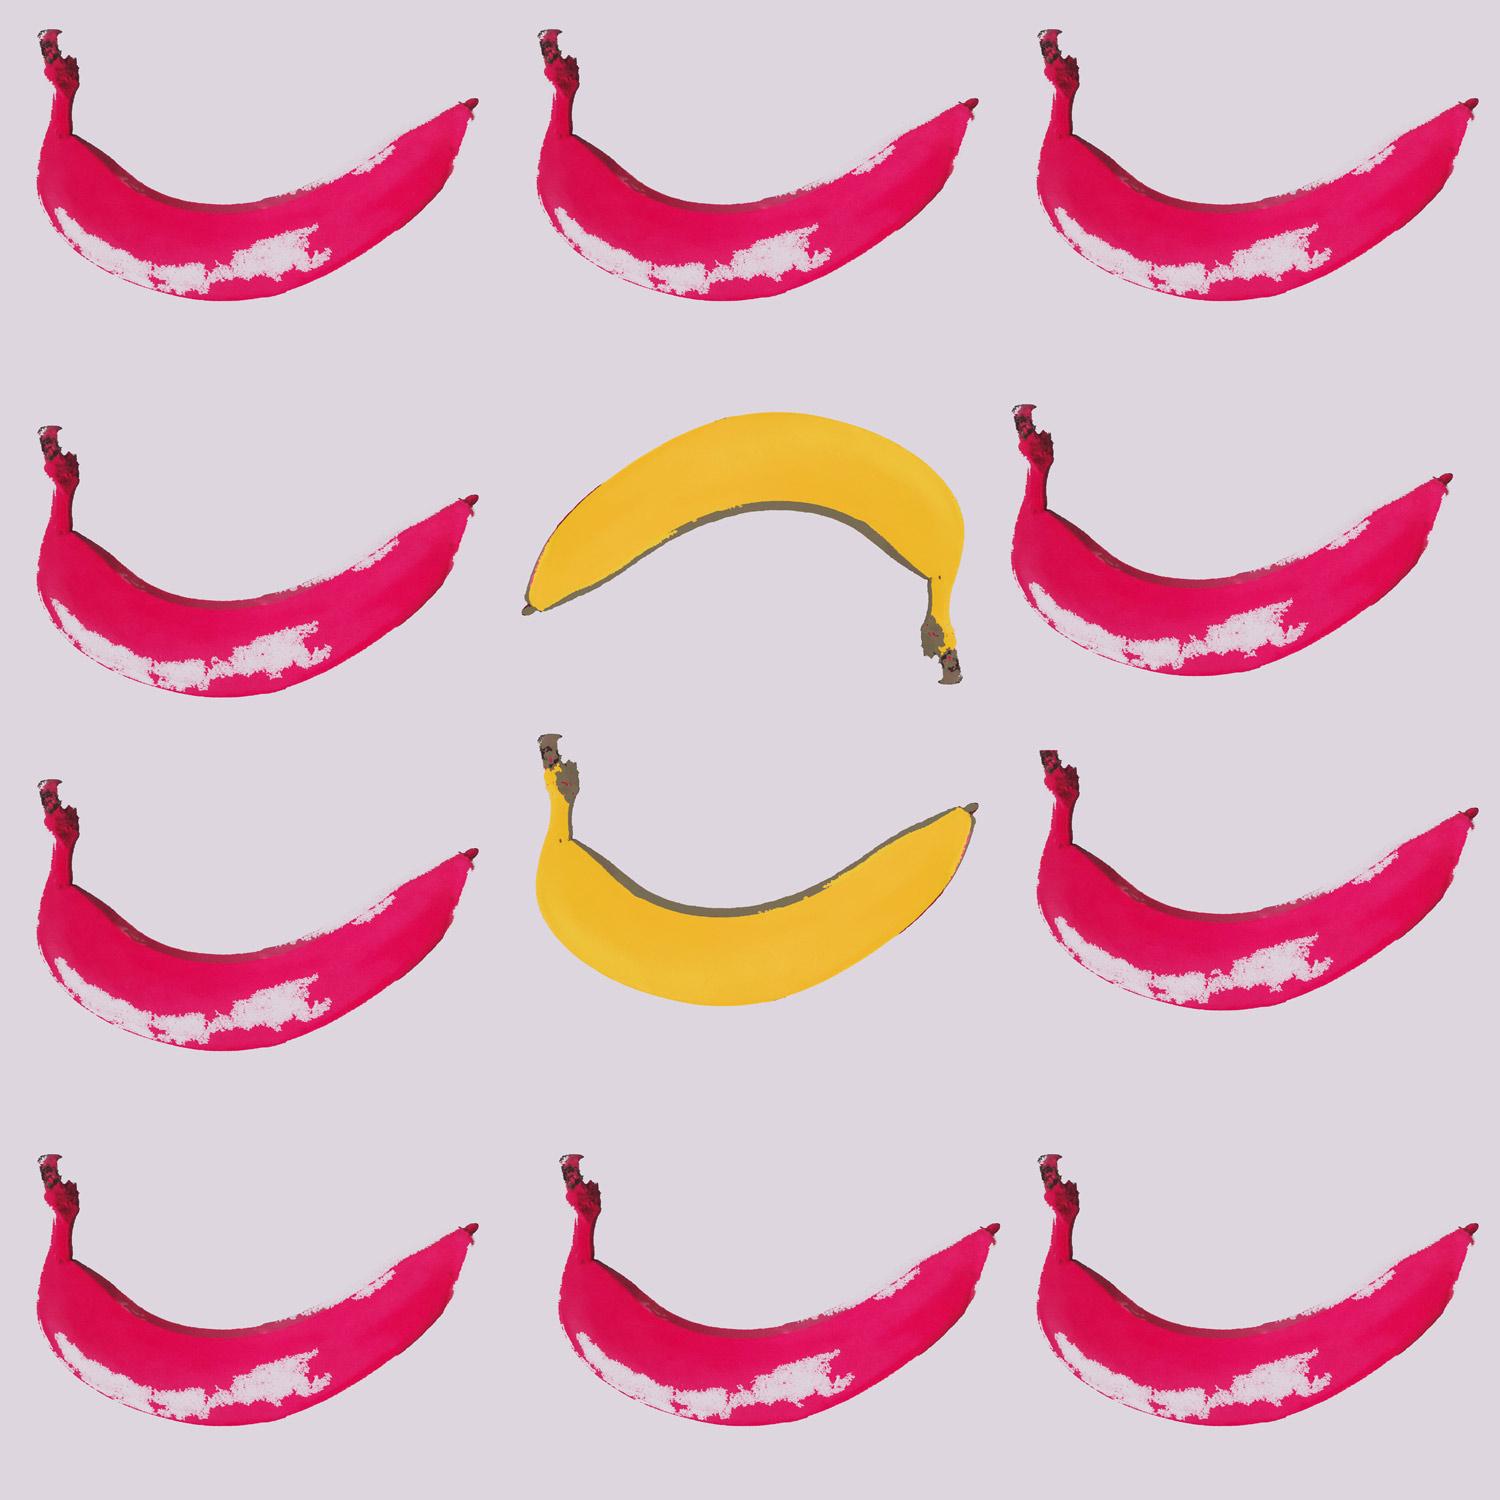 Bananas VI contemporary pop art limited edition photograph by Jochen Cerny For Sale 2